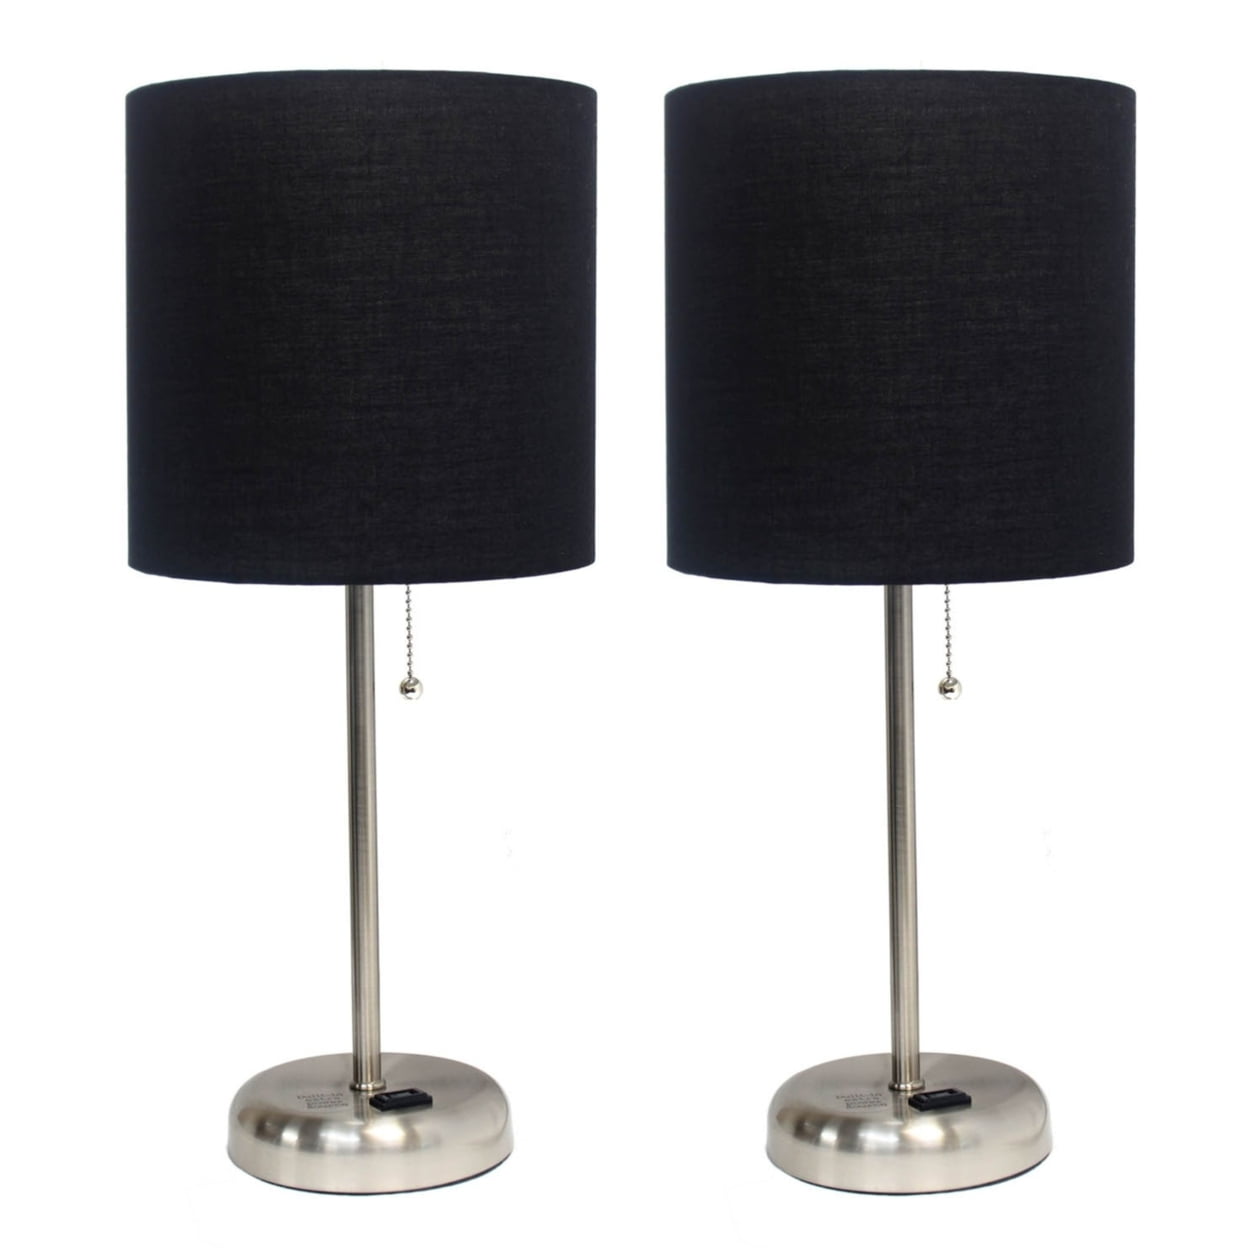 Lc2001-blk-2pk Brushed Steel Stick Table Lamp With Charging Outlet & Fabric Shade, Black - Set Of 2